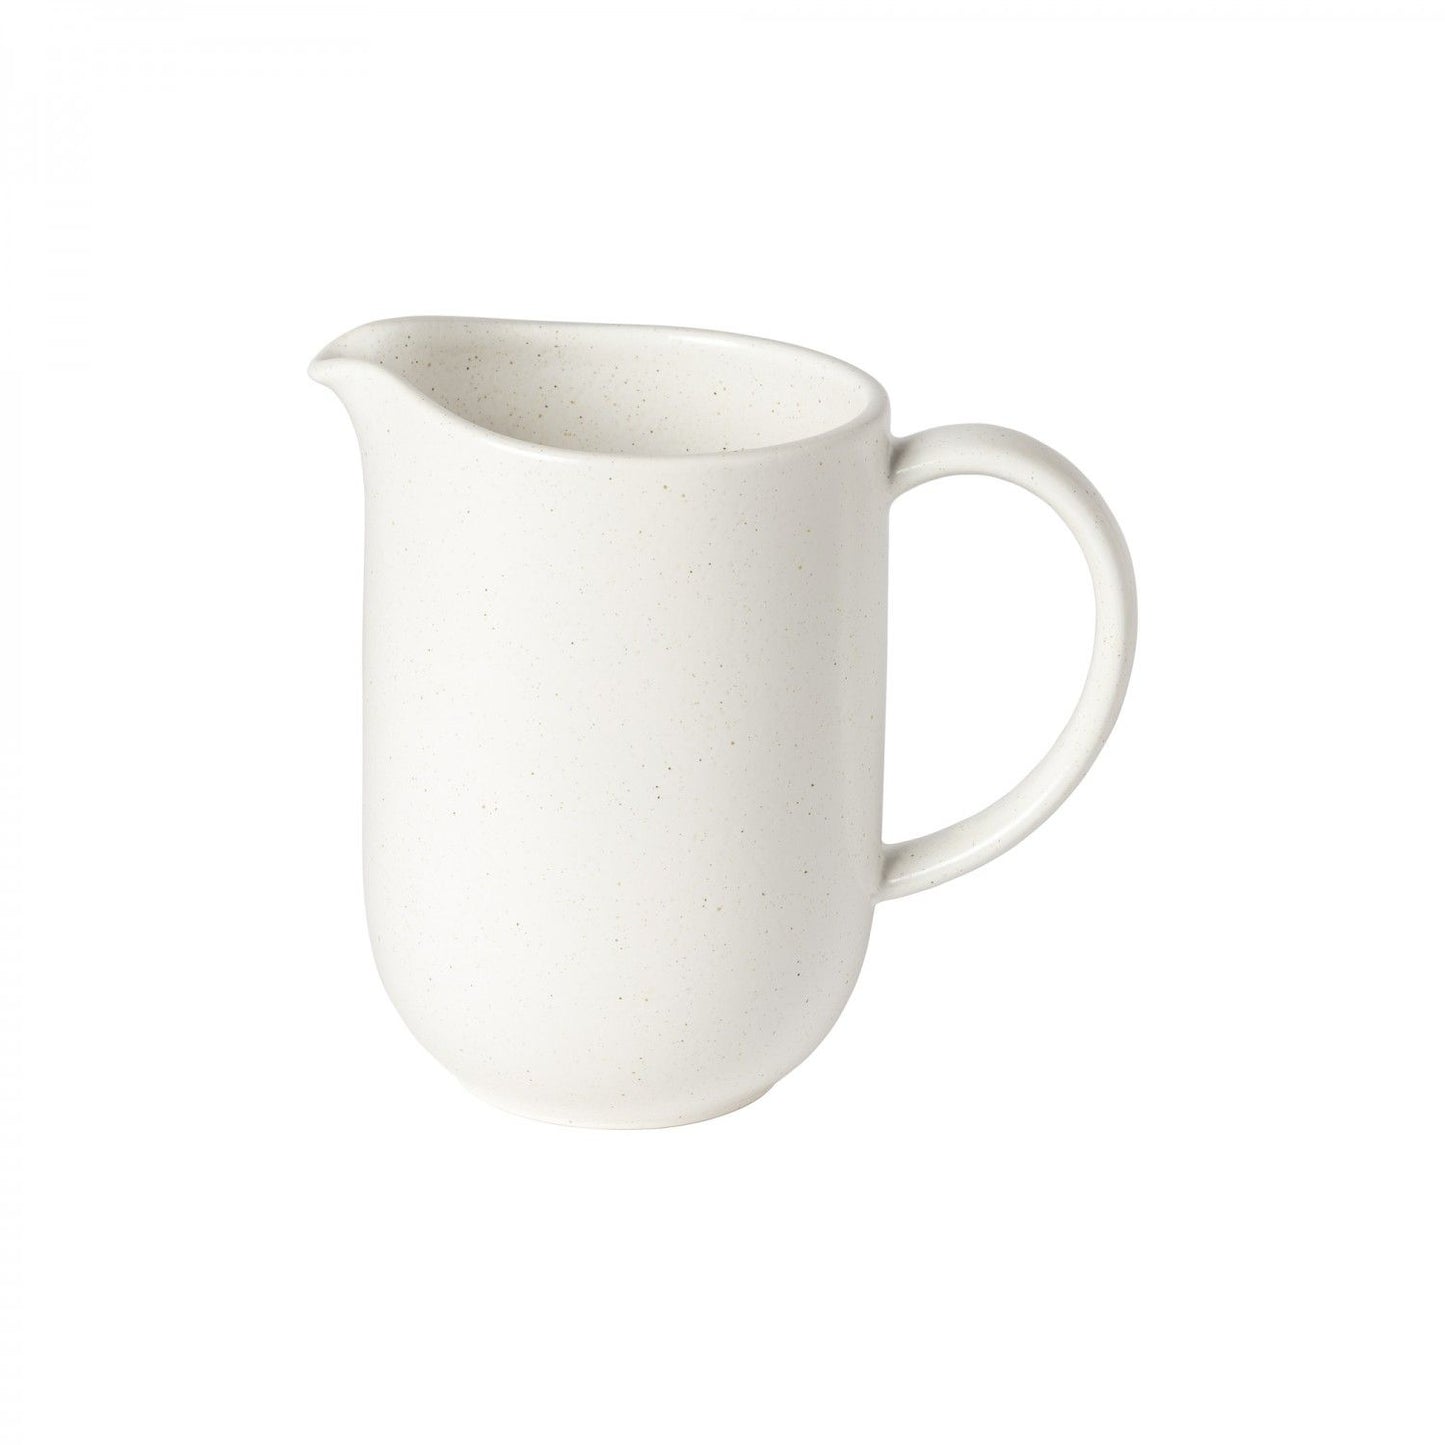 salt pacifica pitcher on a white background